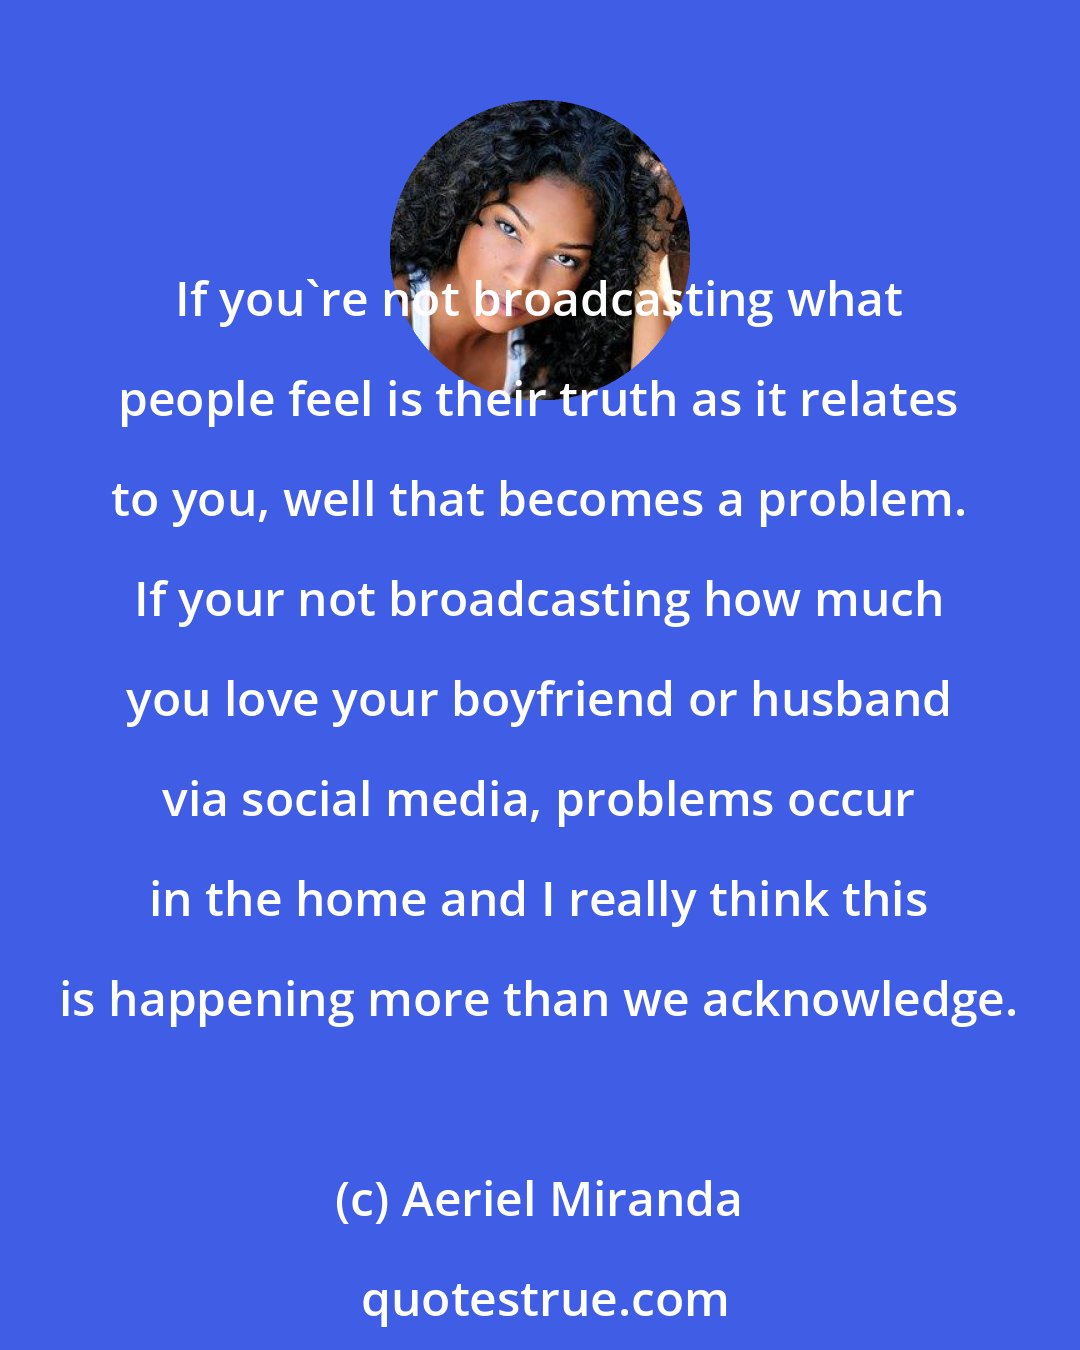 Aeriel Miranda: If you're not broadcasting what people feel is their truth as it relates to you, well that becomes a problem. If your not broadcasting how much you love your boyfriend or husband via social media, problems occur in the home and I really think this is happening more than we acknowledge.